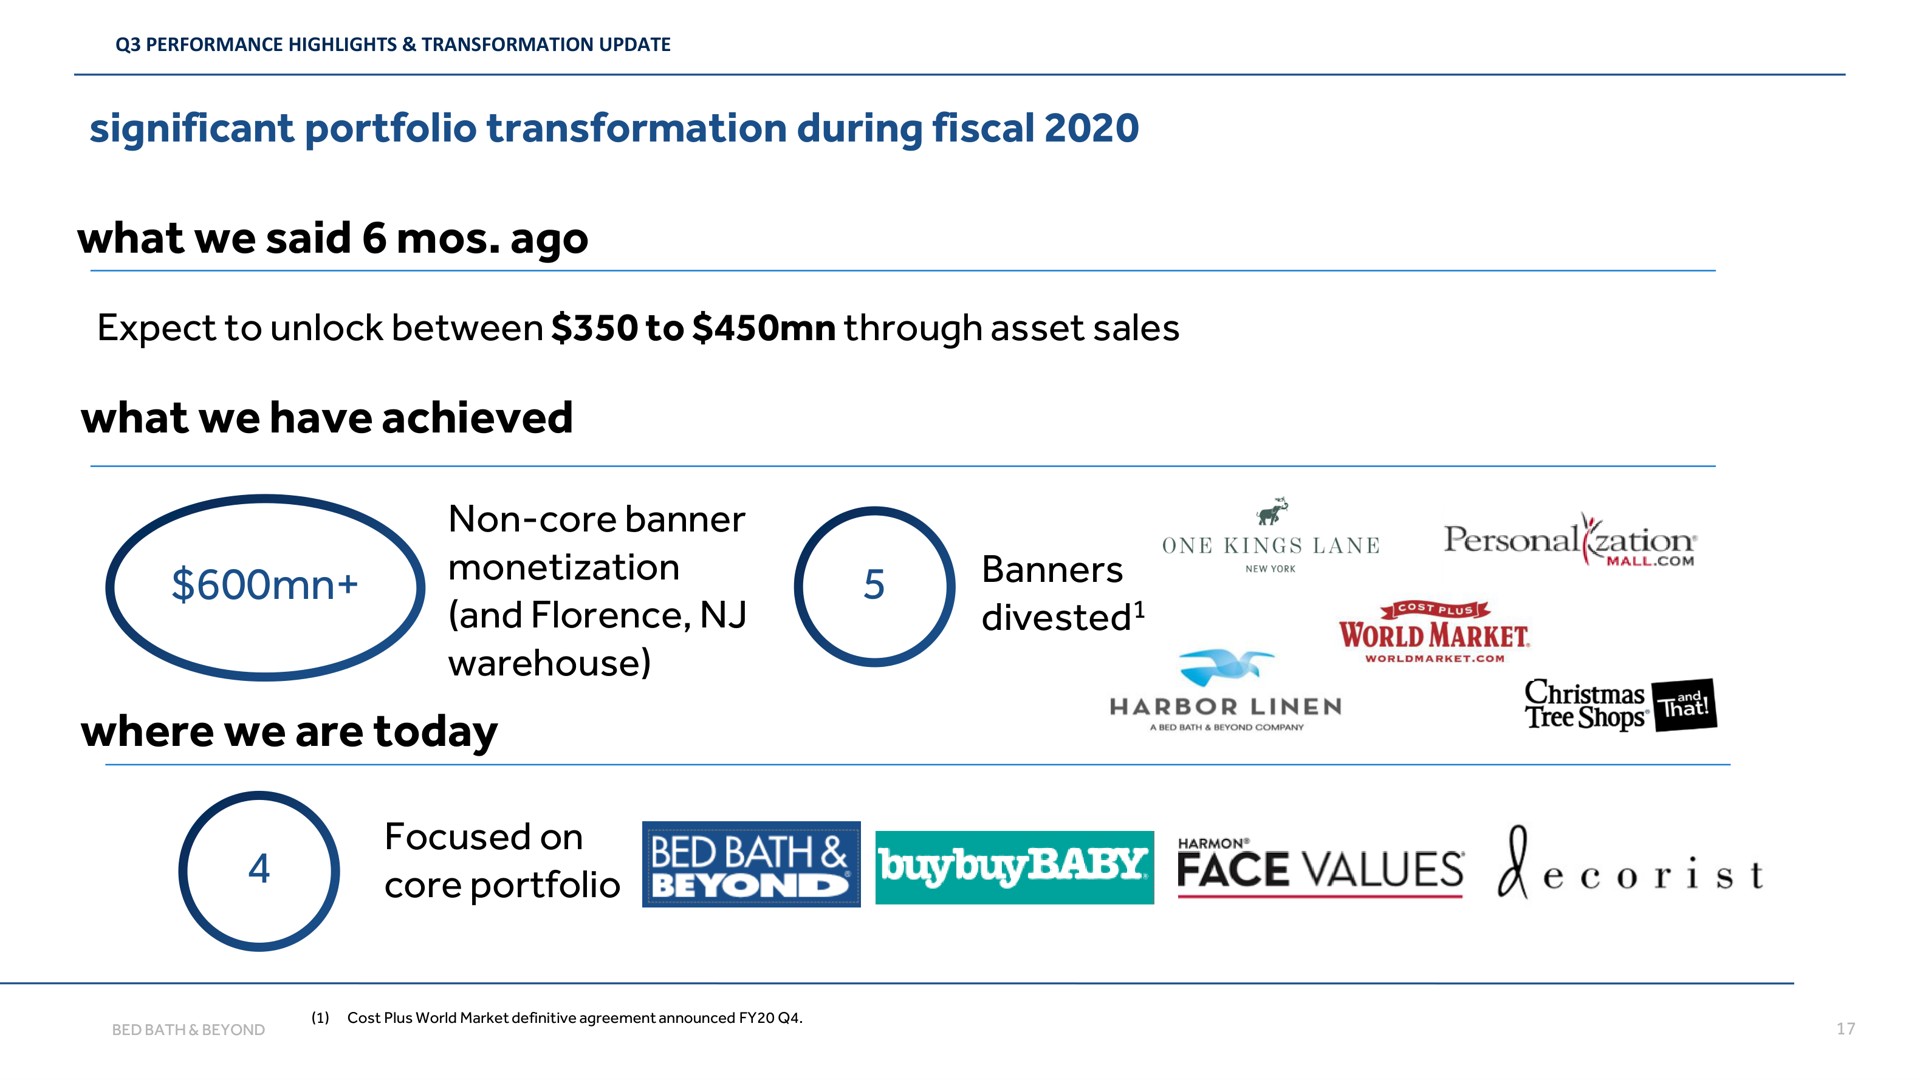 significant portfolio transformation during fiscal what we said mos ago expect to unlock between to through asset sales what we have achieved non core banner monetization and florence warehouse where we are today focused on core portfolio banners divested divested mall new ors wort marker sures face values face values | Bed Bath & Beyond